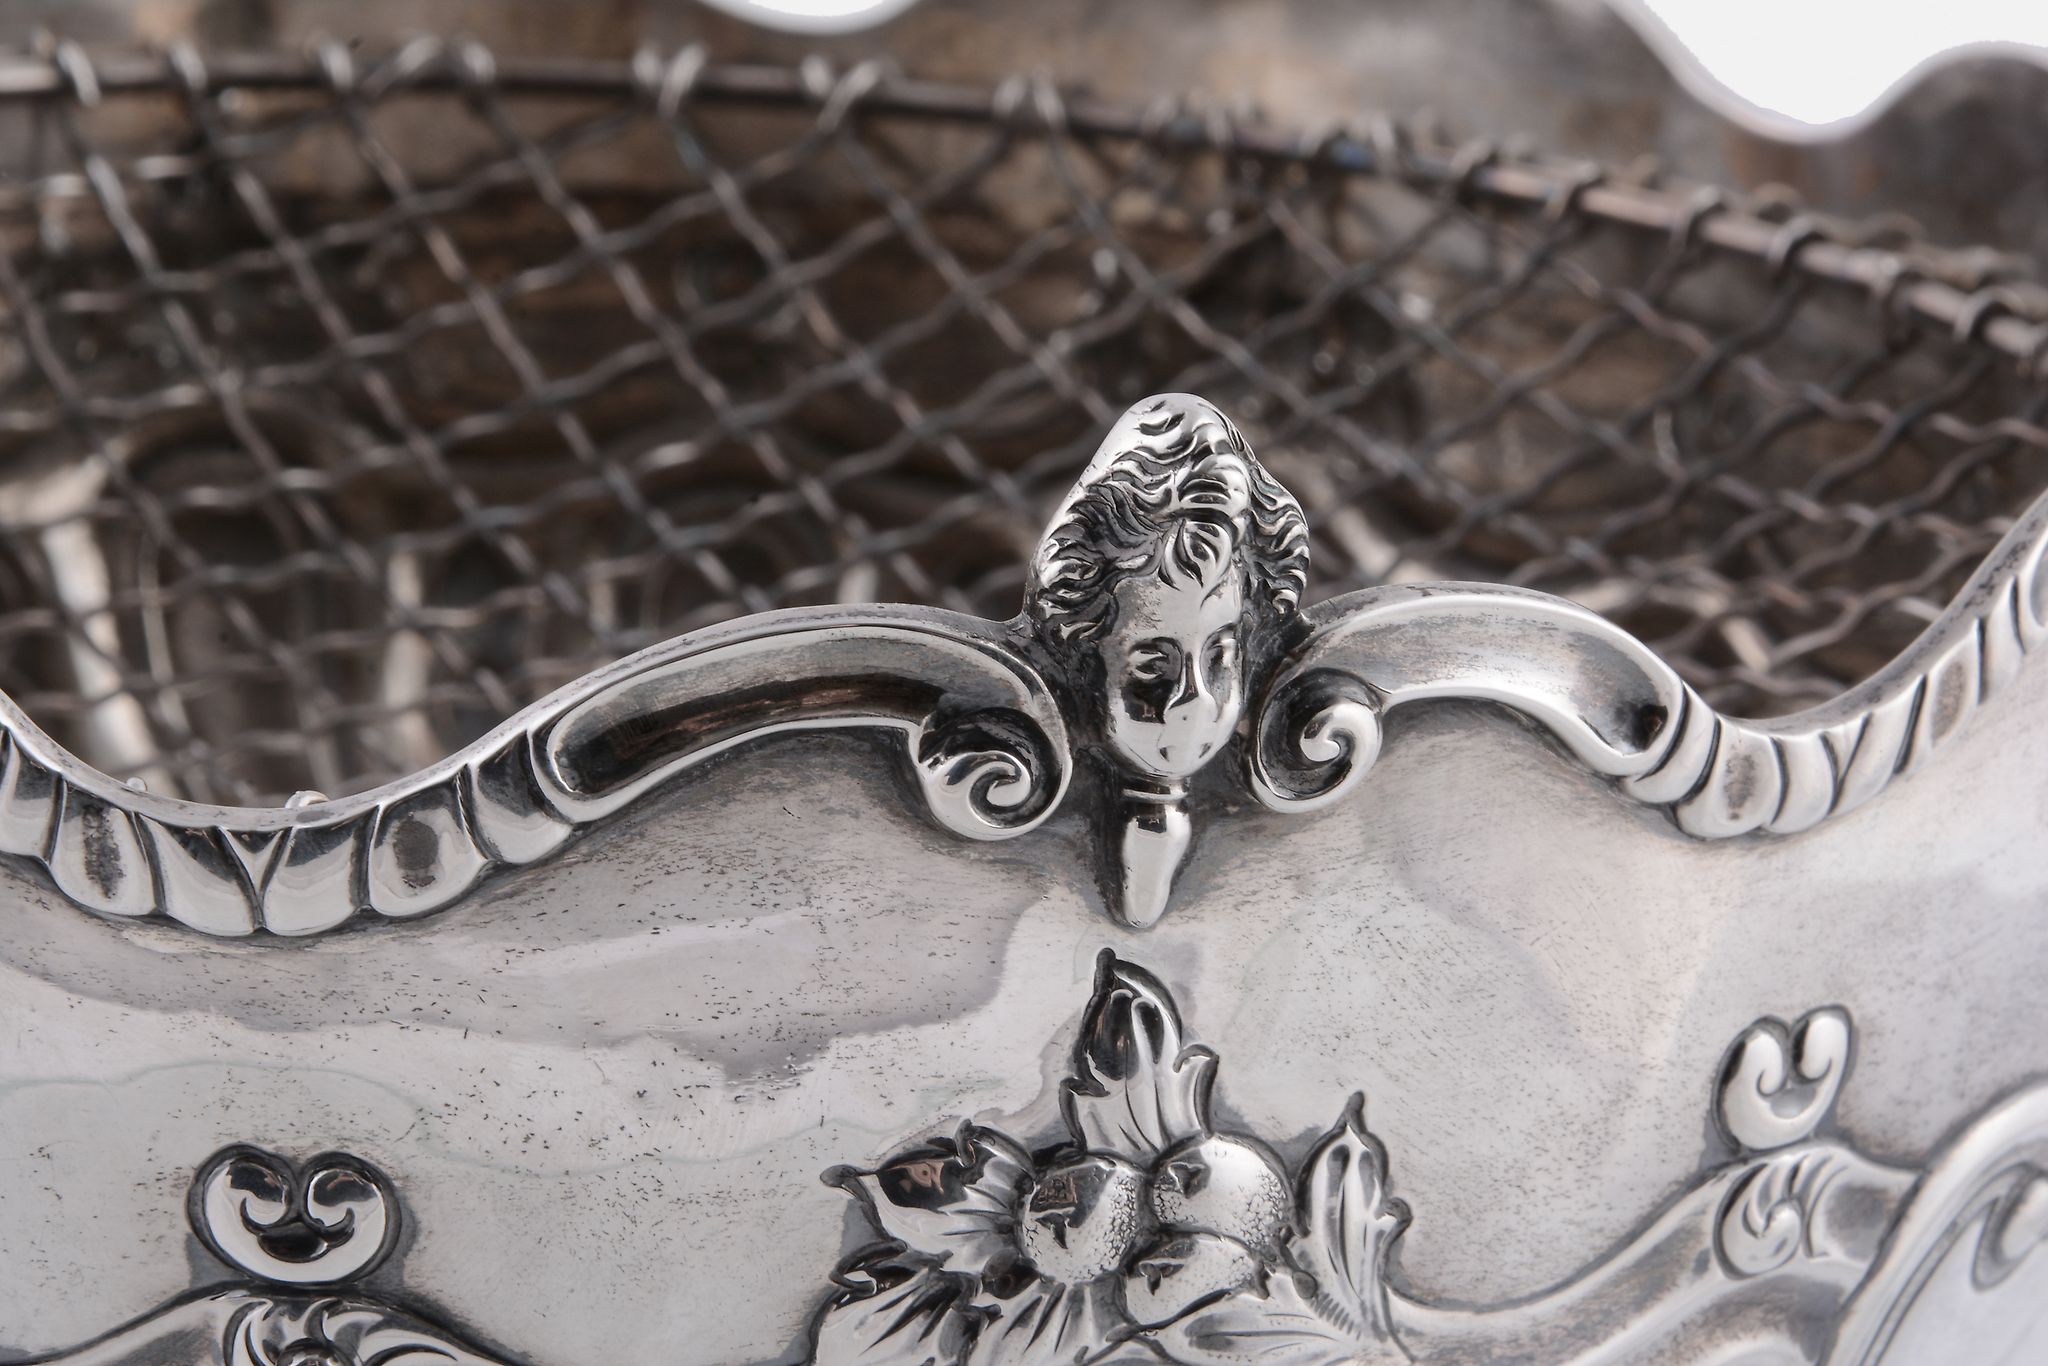 A late Victorian silver pedestal rose bowl by Charles Stuart Harris, London 1897, with a cherub - Image 2 of 2